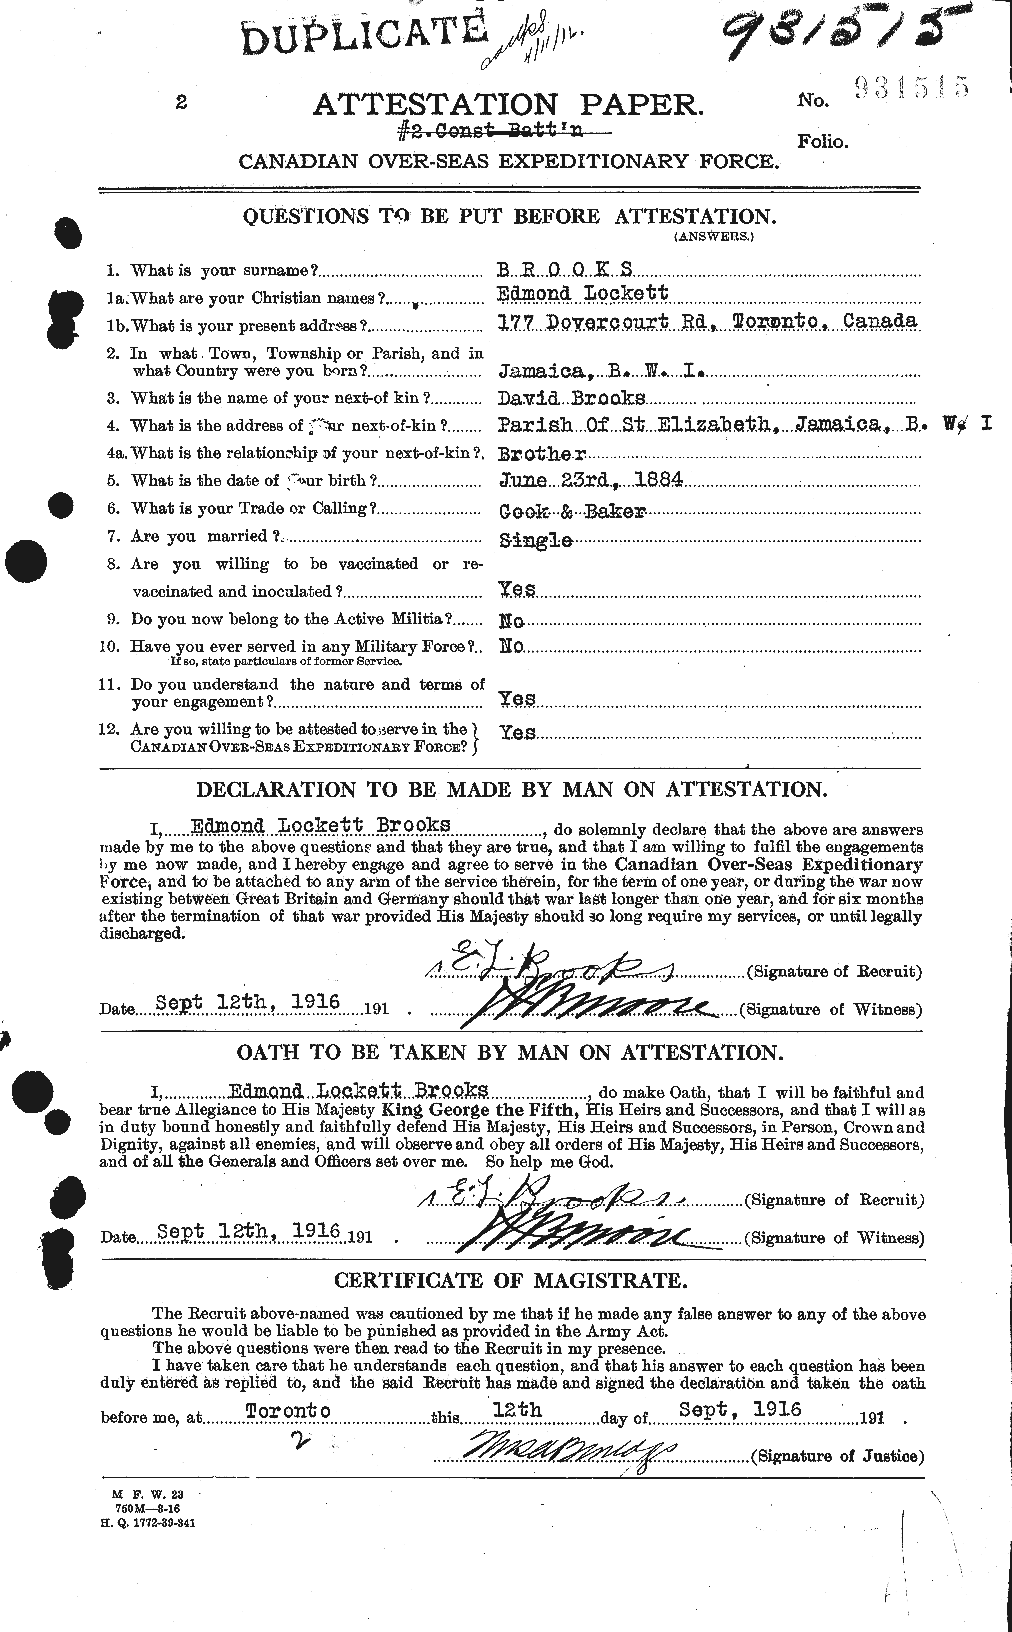 Personnel Records of the First World War - CEF 261564a